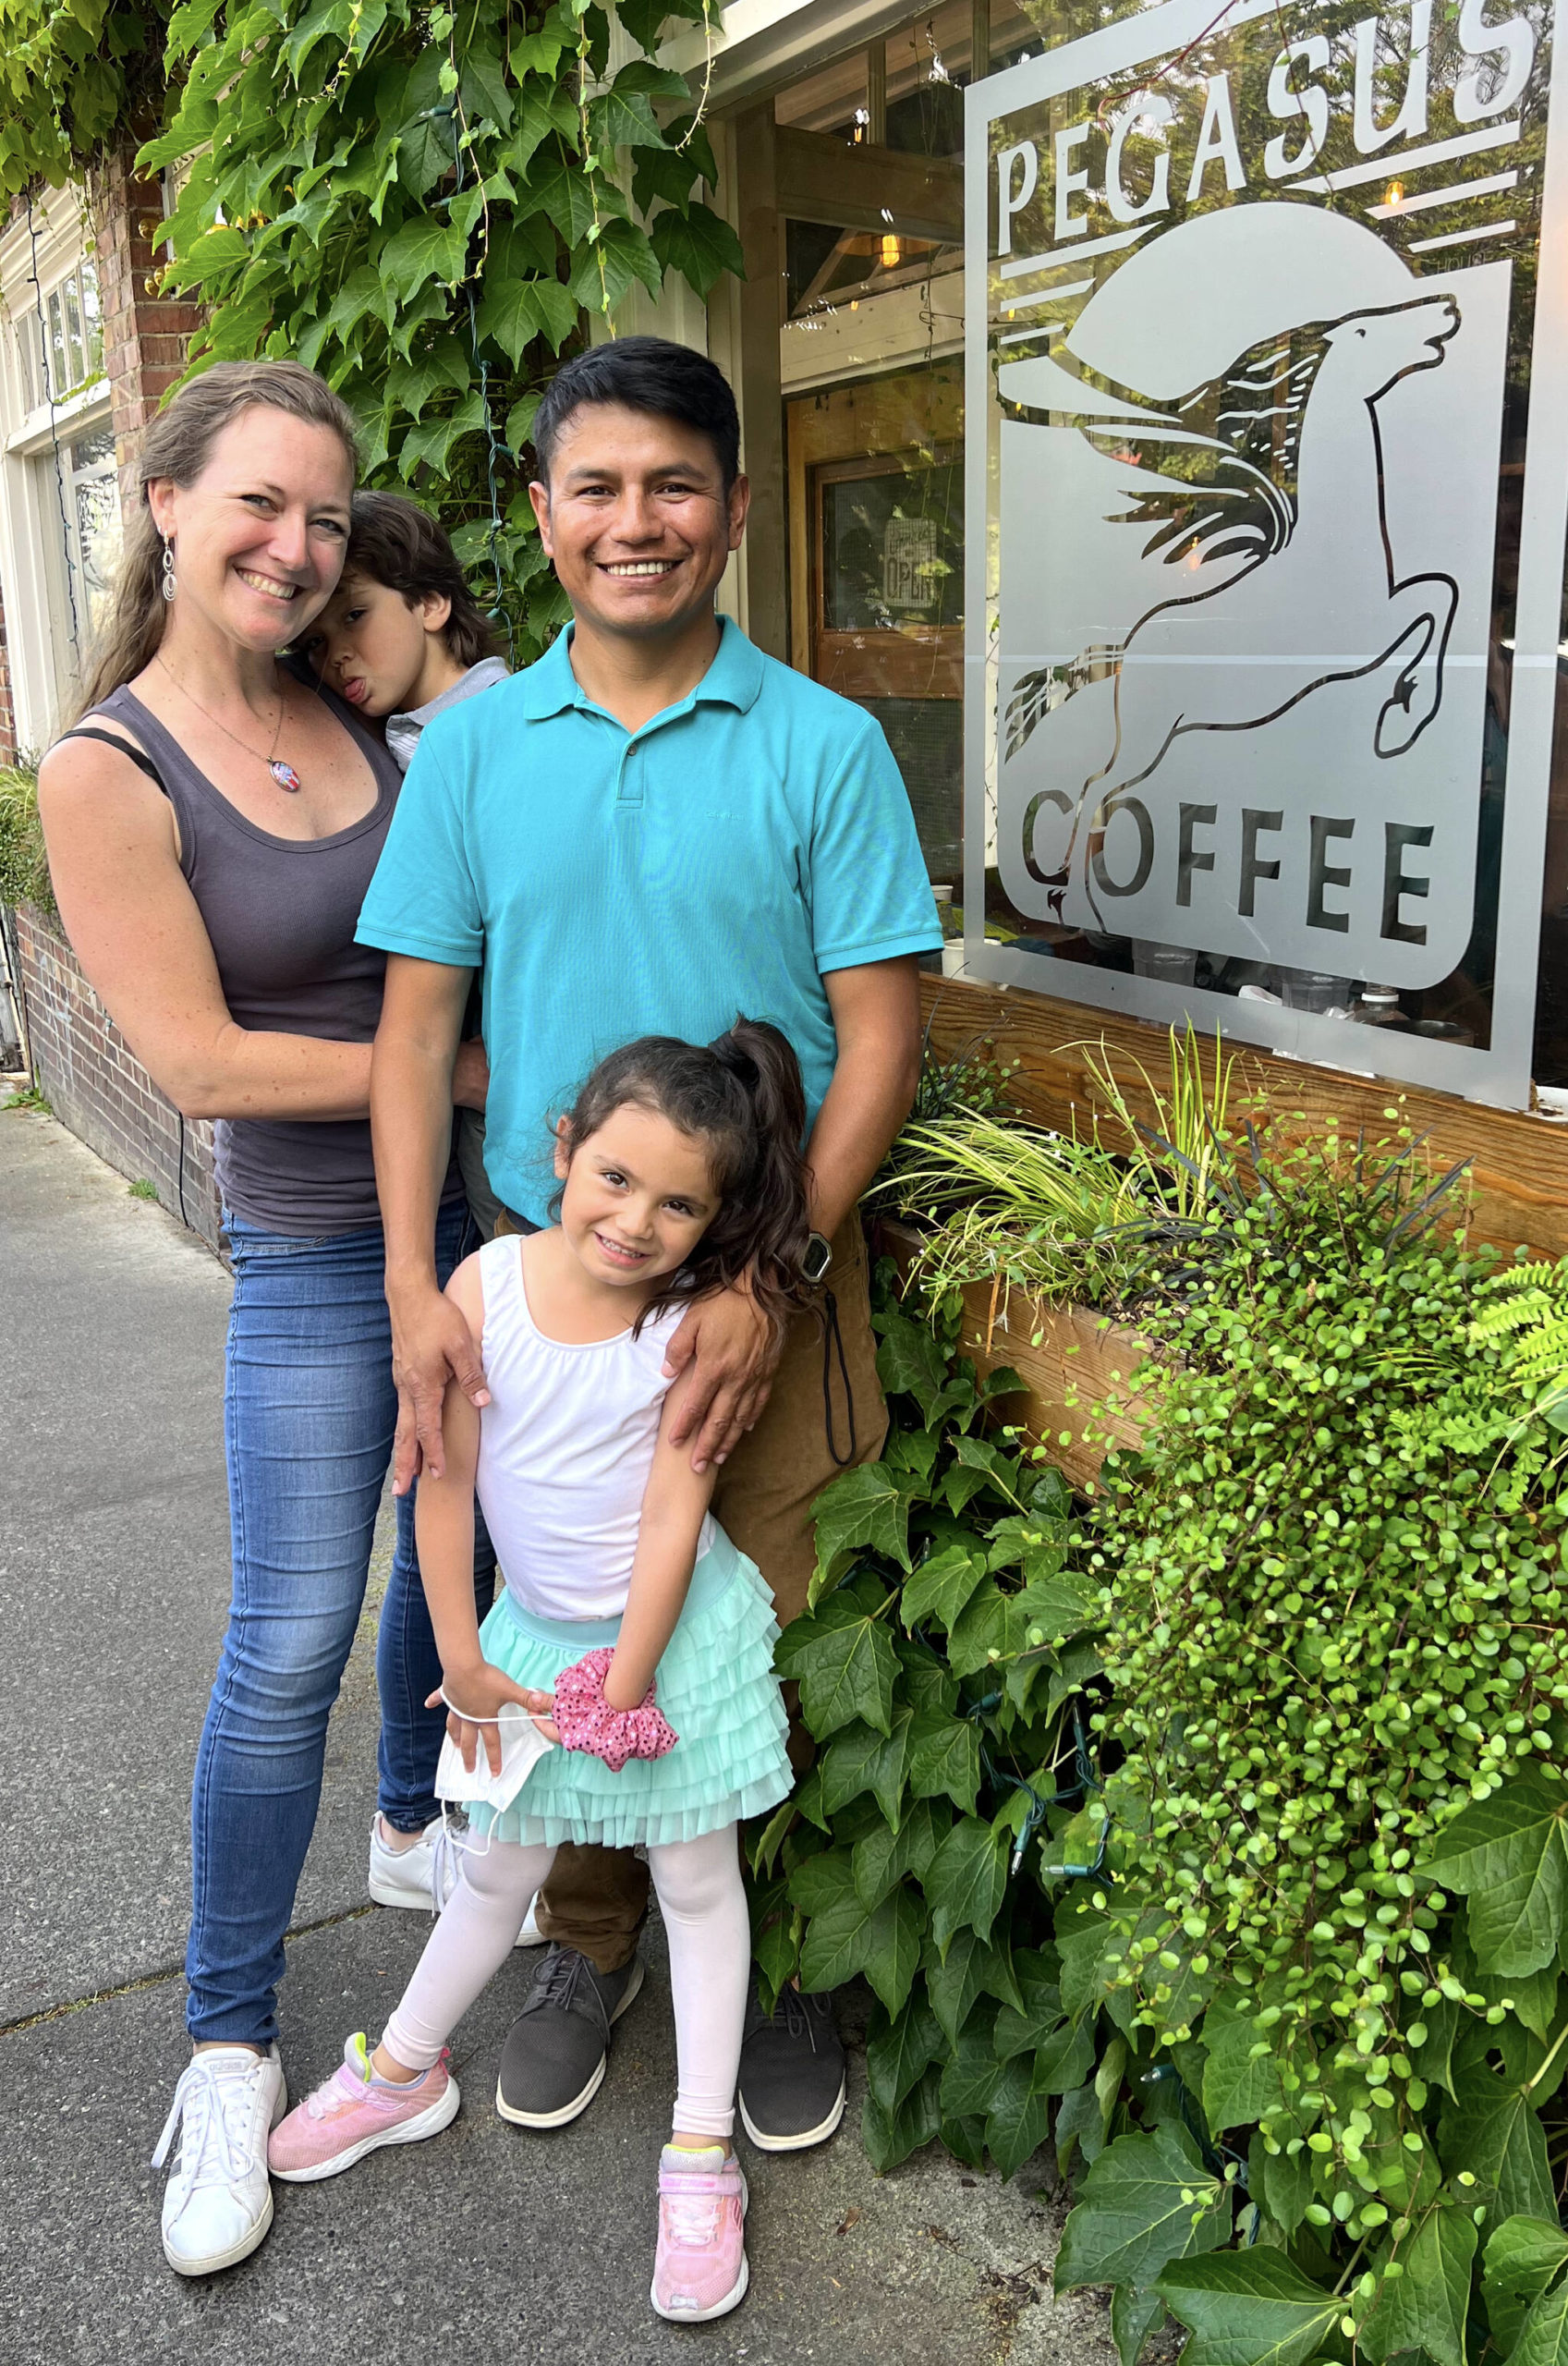 Gerson Morales, wife Alissa Moen, son Luka (3) and daughter Maia (5) at Pegasus Coffee during a trip to visit family on Bainbridge Island.